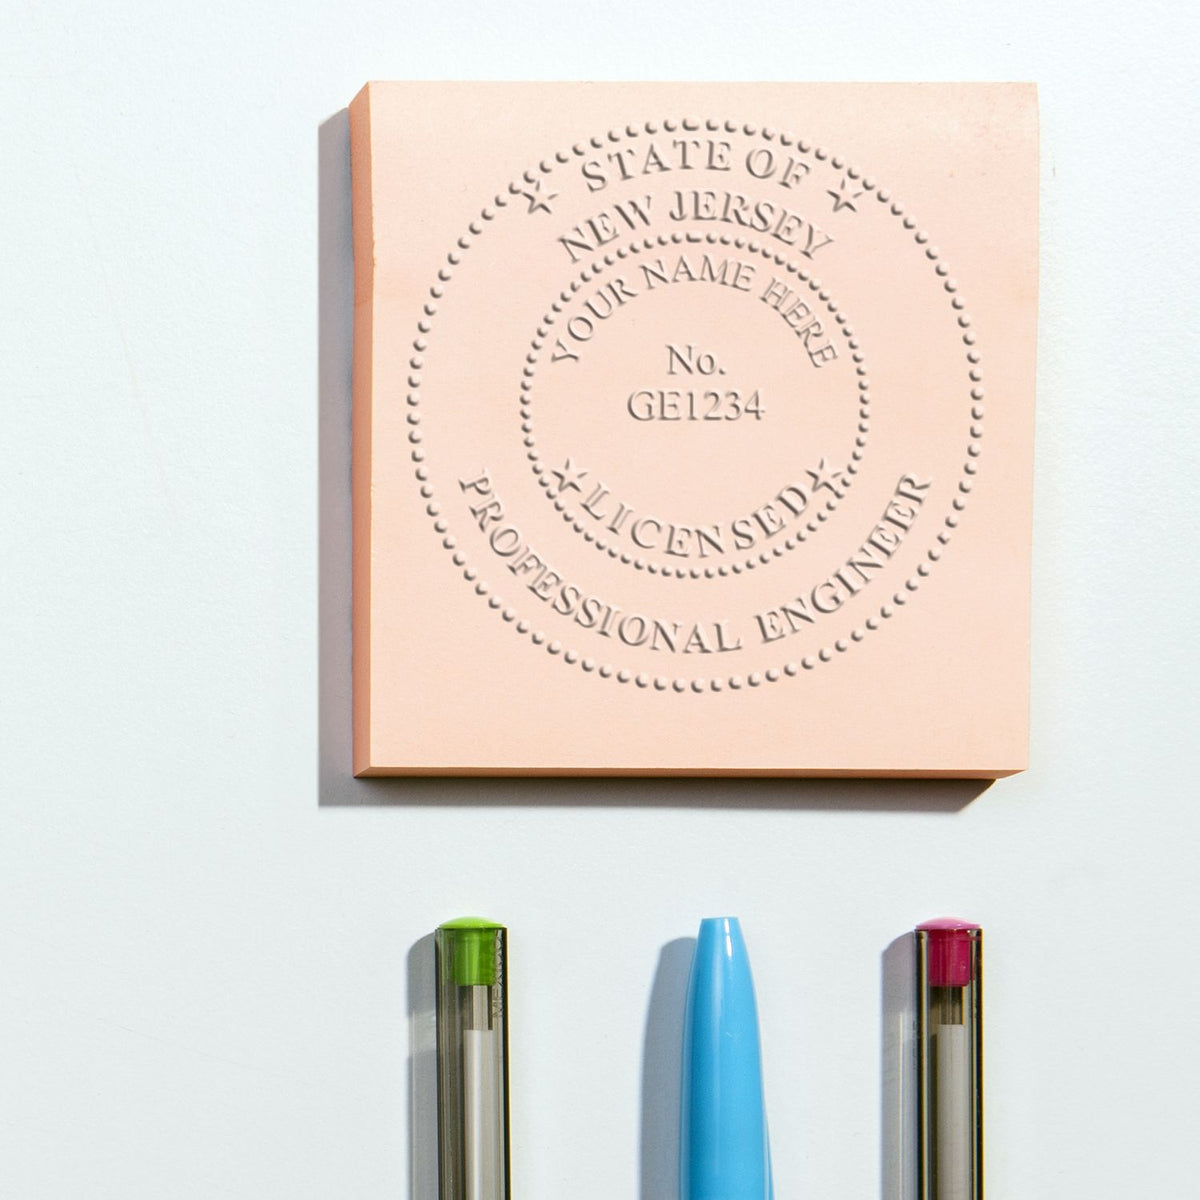 A photograph of the New Jersey Engineer Desk Seal stamp impression reveals a vivid, professional image of the on paper.